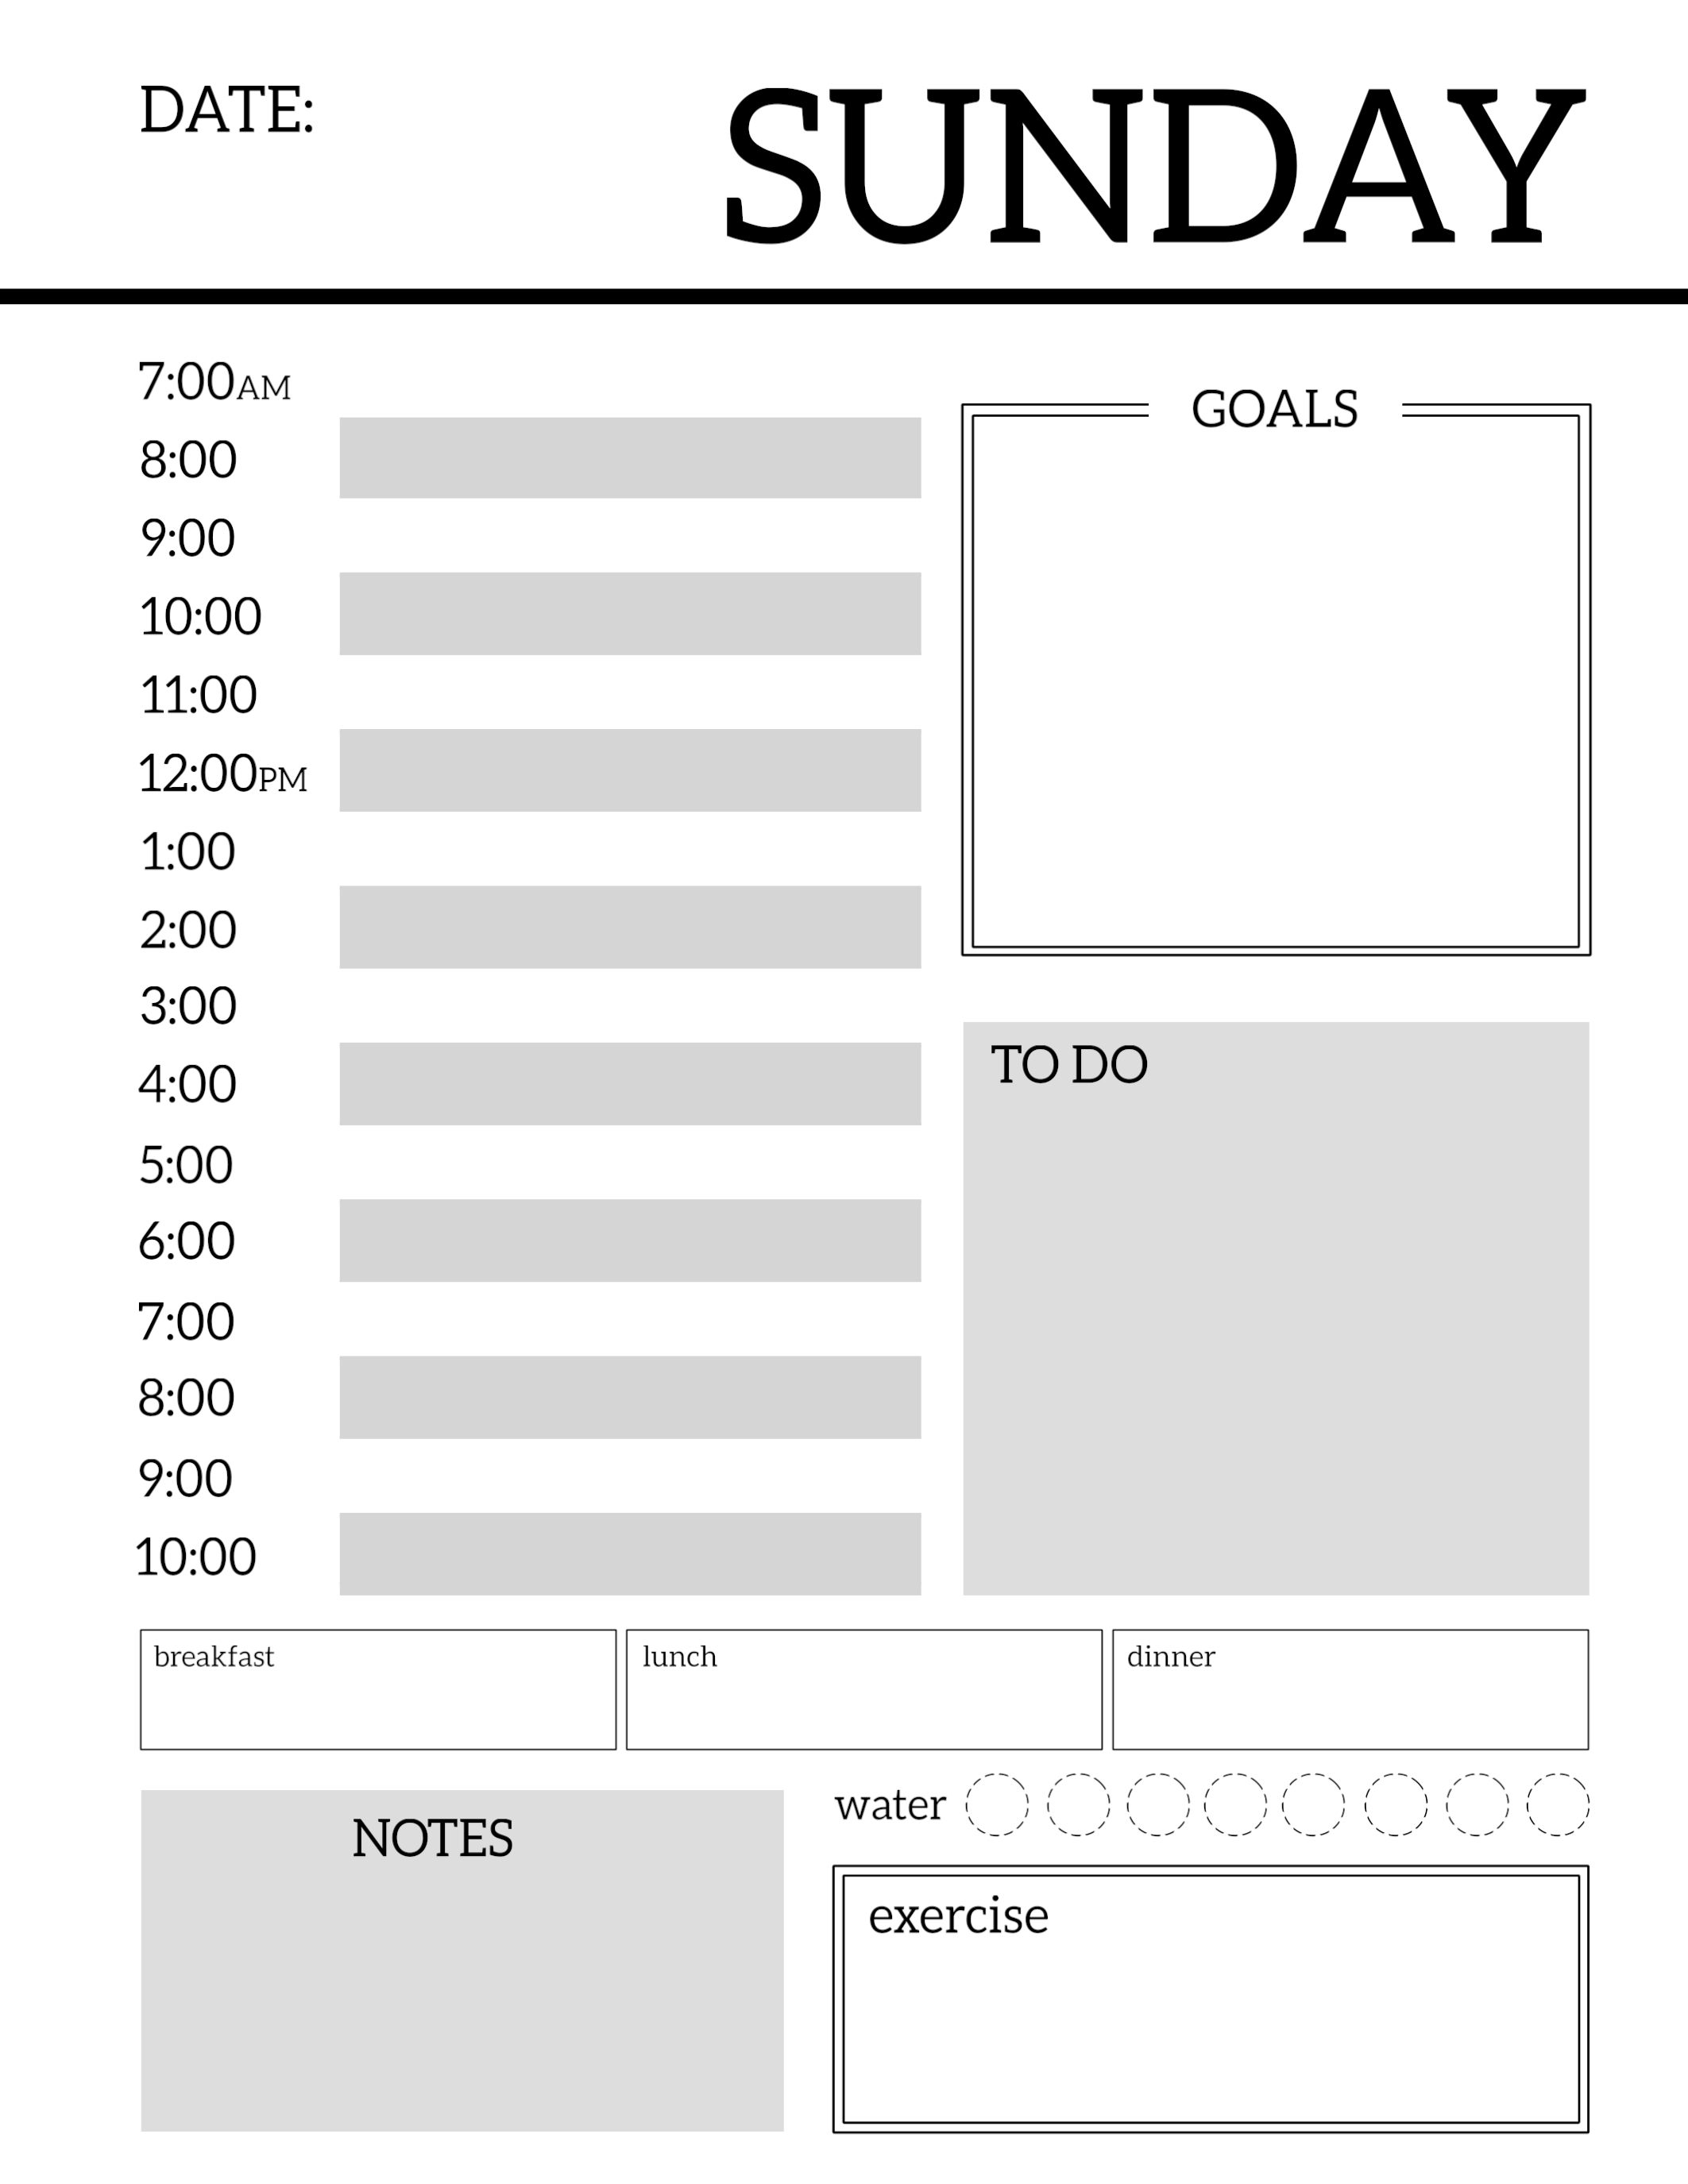 Printable Te Weekly Planner Blank Daily Schedule For Preschool | Smorad throughout Printable Daily Schedule With Notes